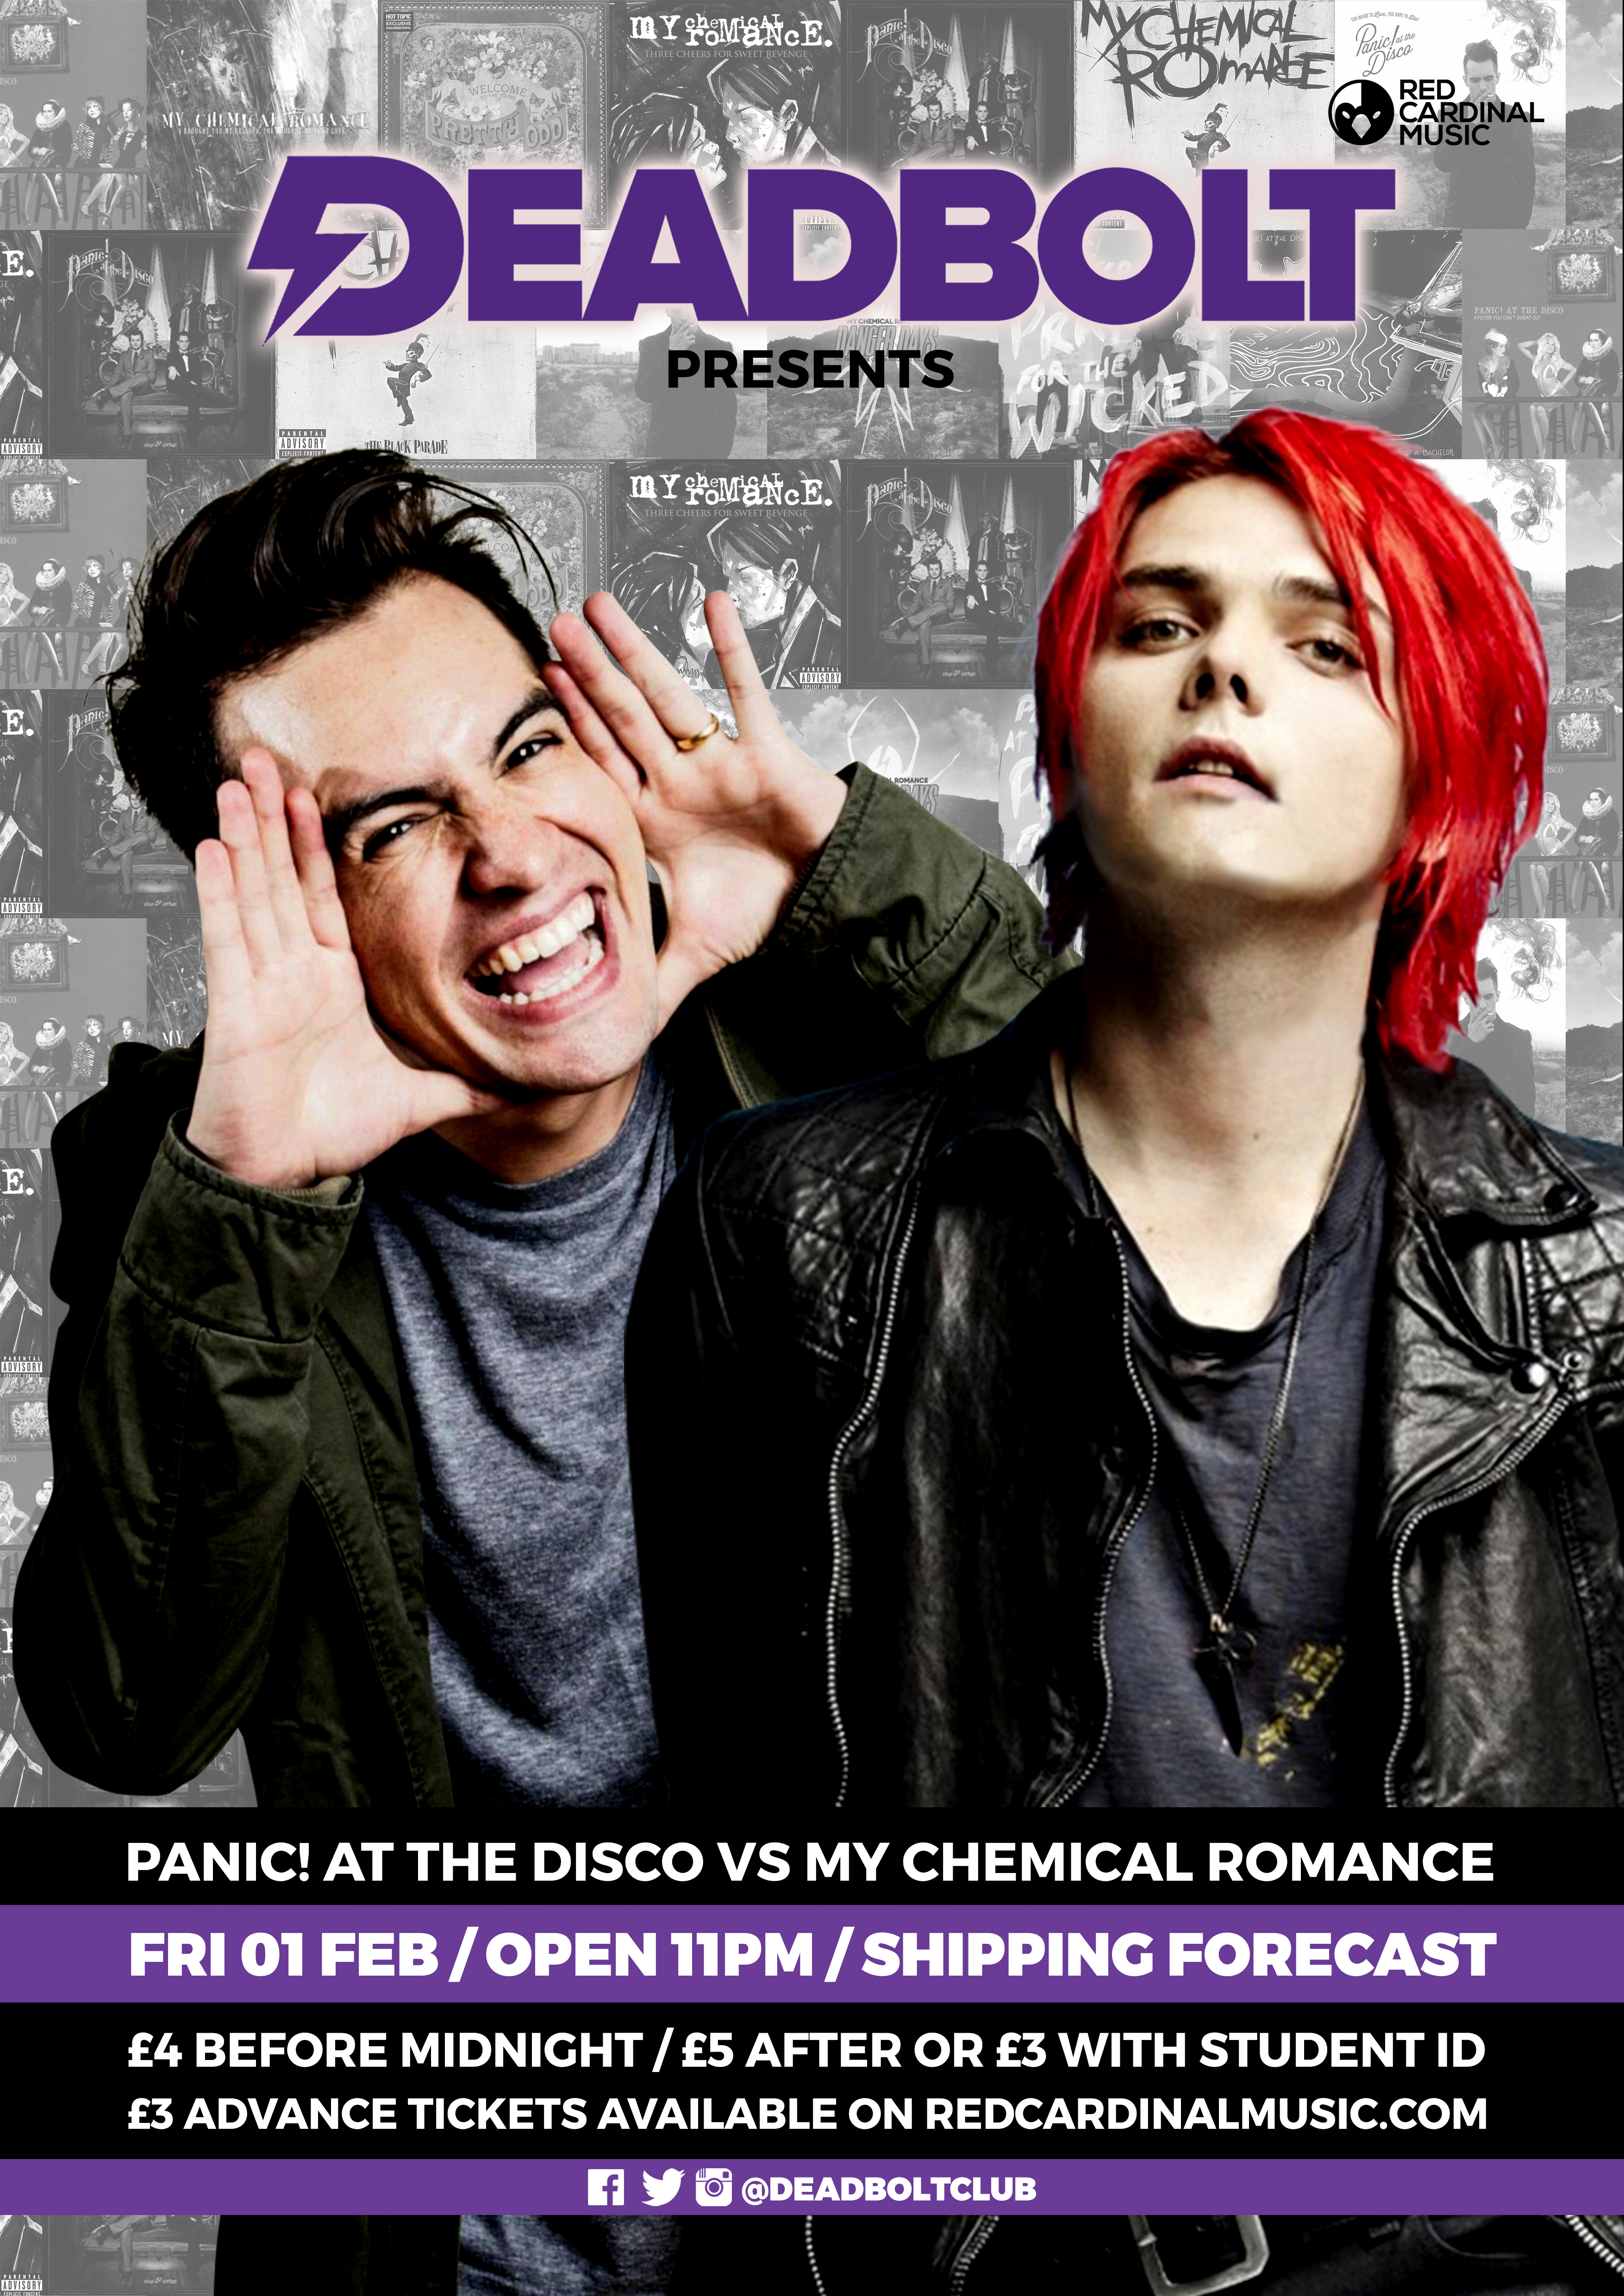 Deadbolt - Panic! At The Disco vs My Chemical Romance Special - Alternative Club Liverpool - Red Cardinal Music